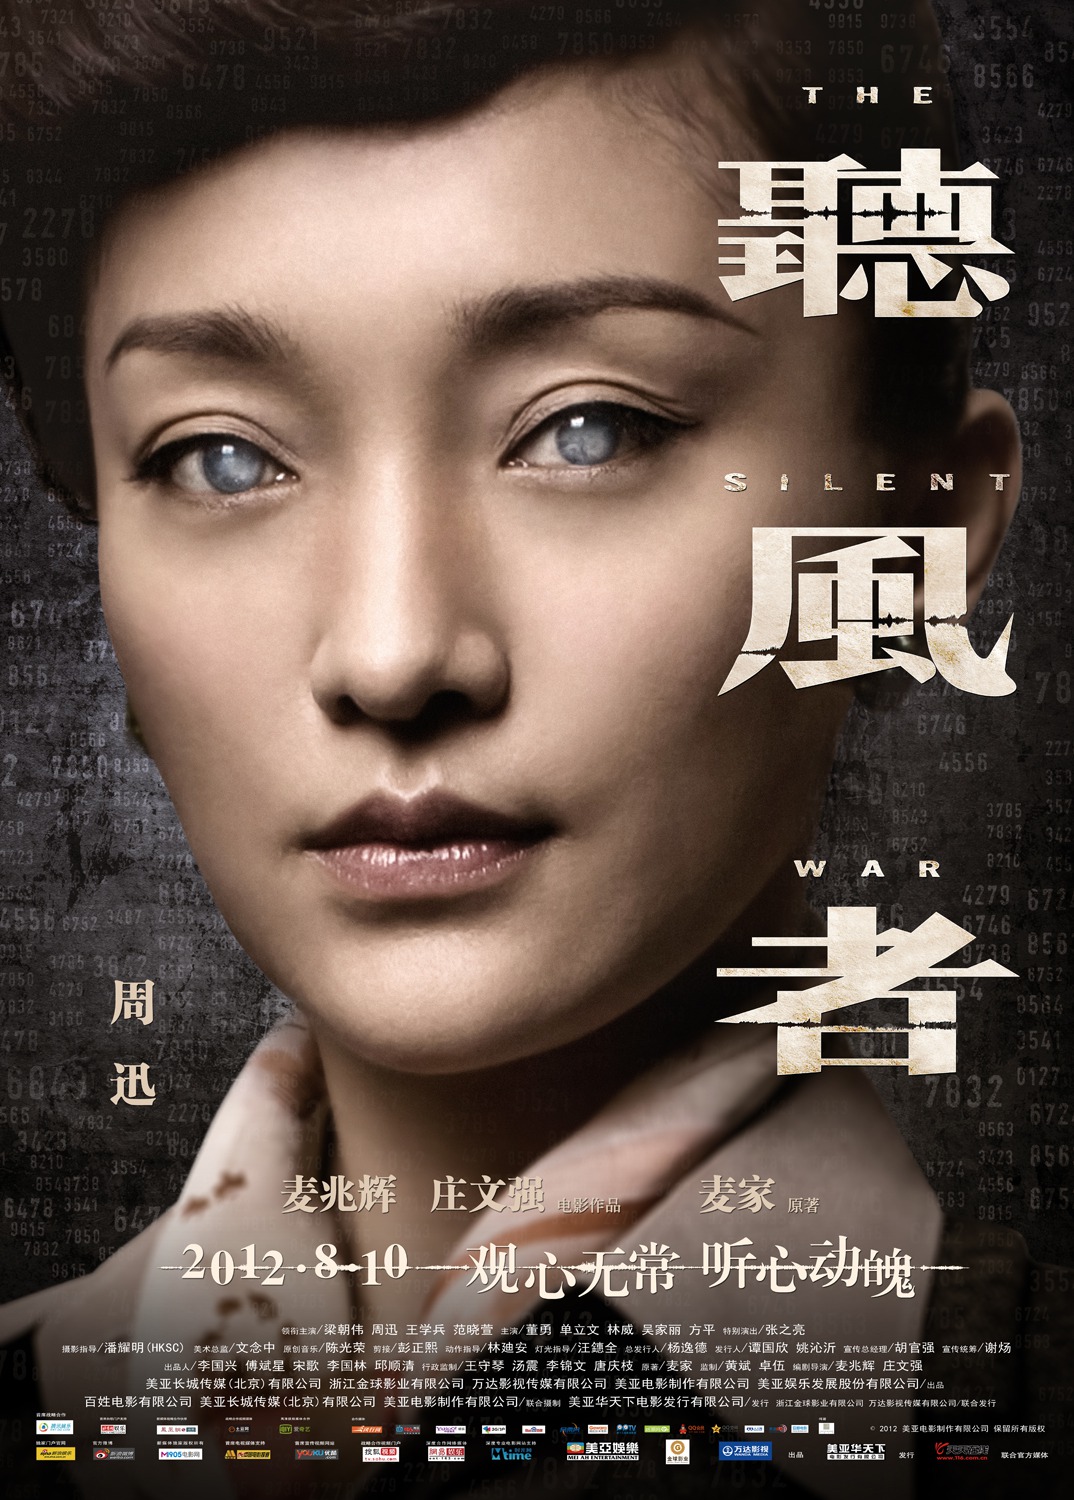 Extra Large Movie Poster Image for Ting feng zhe (#4 of 9)